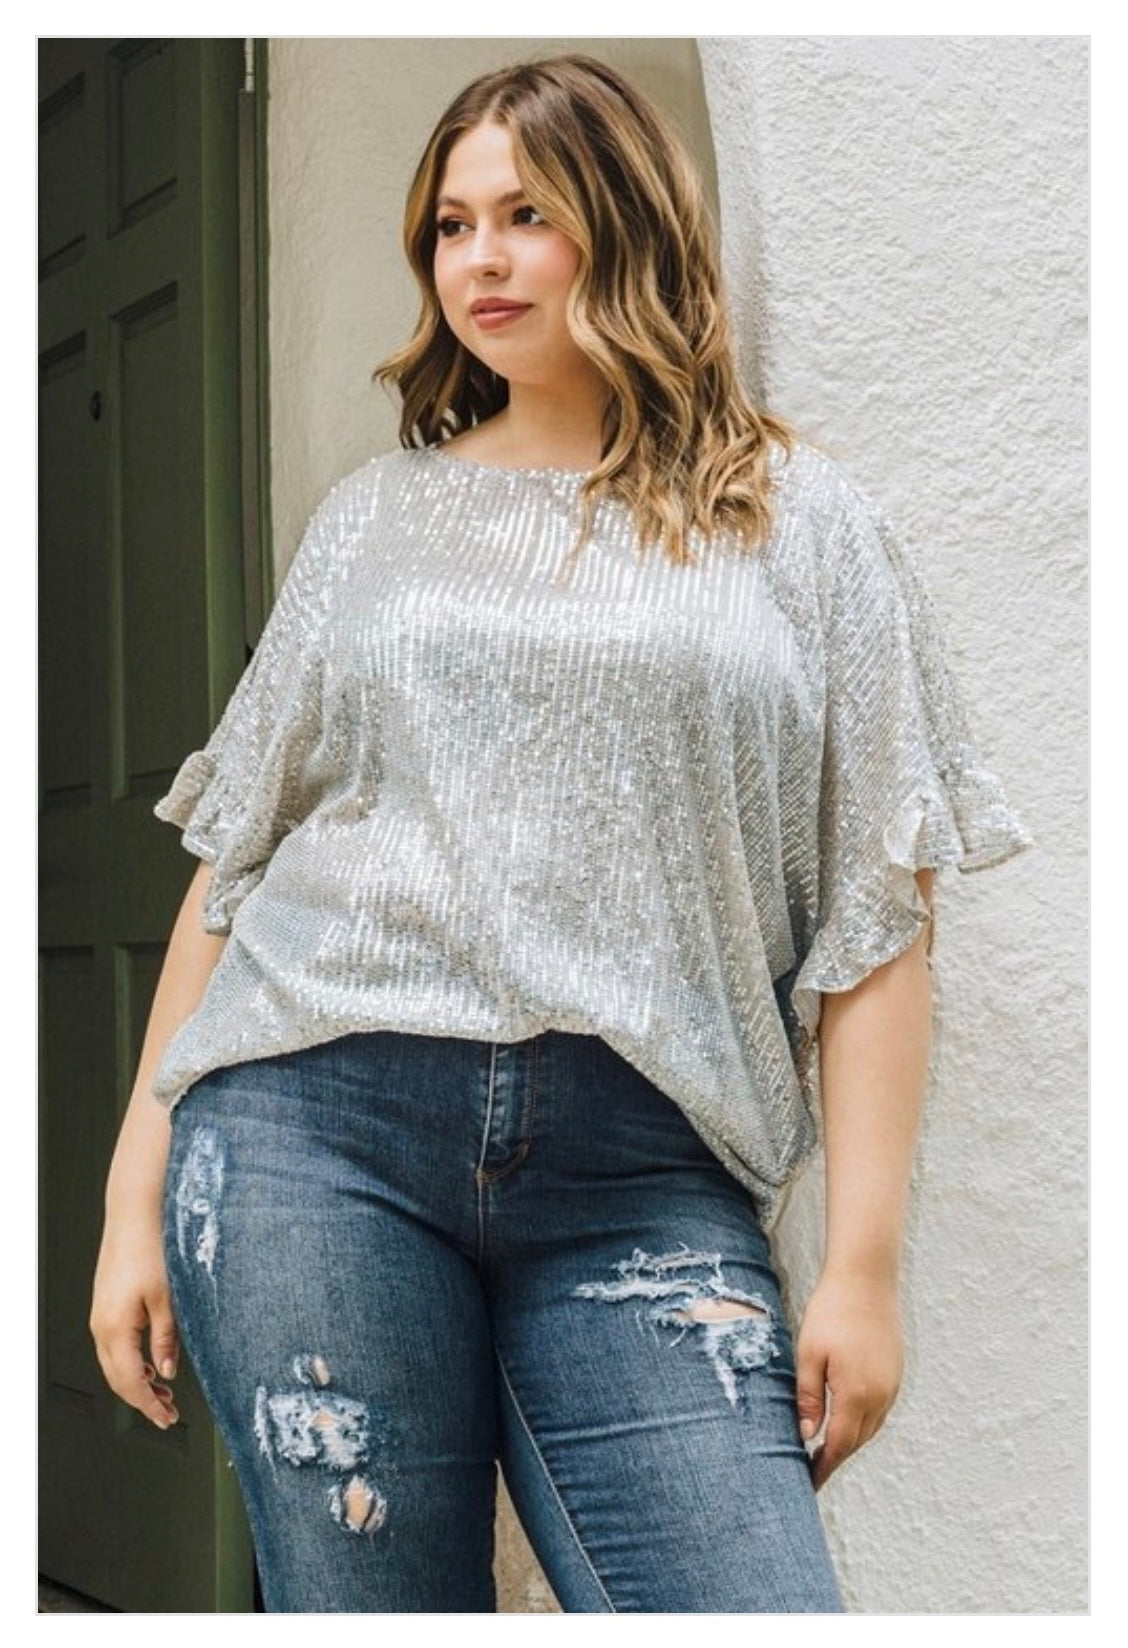 Shainee - Silver Sequin Top